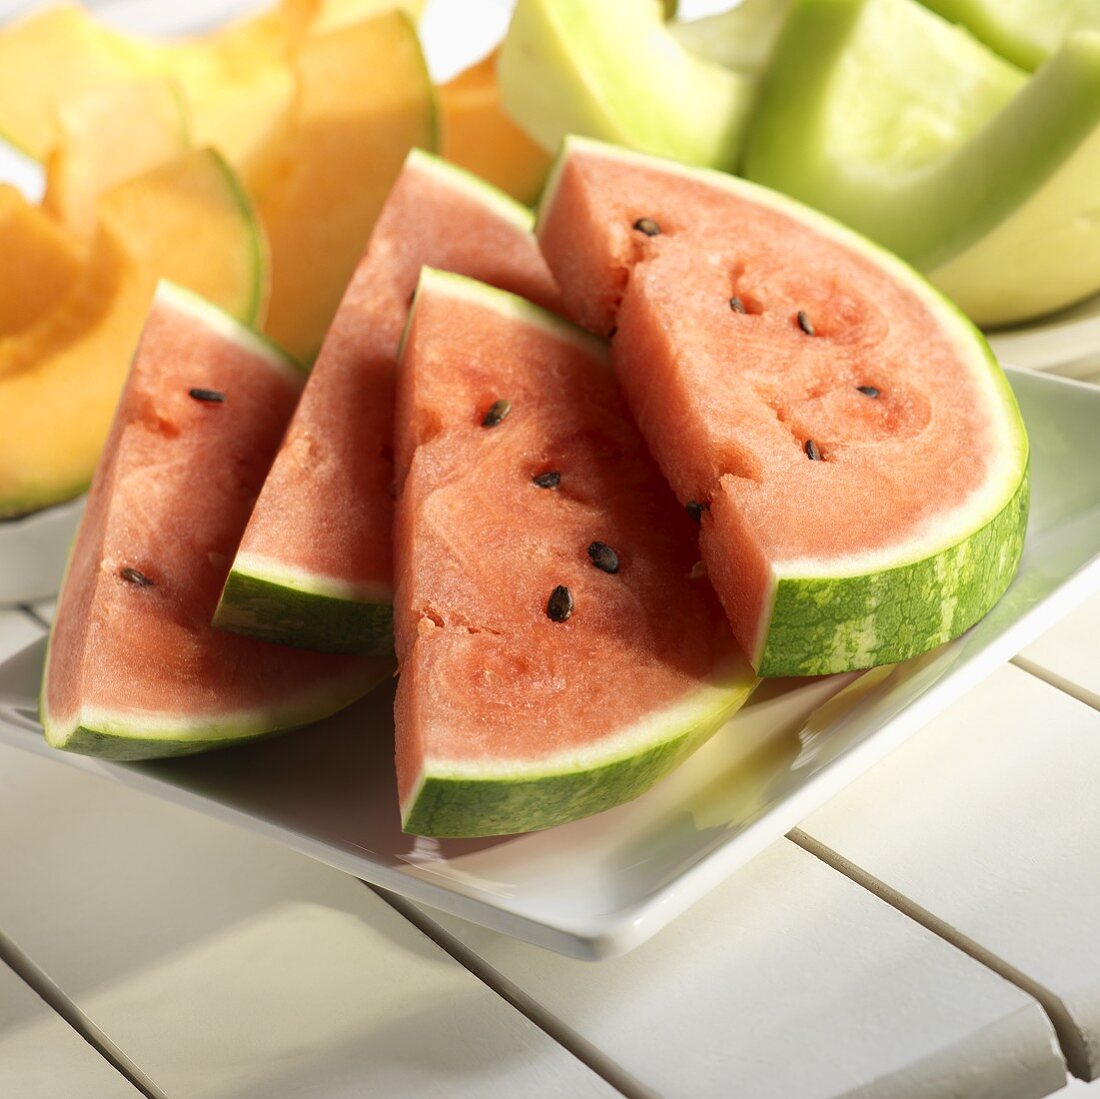 Watermelon Slices; Honeydew and Cantaloupe Slices